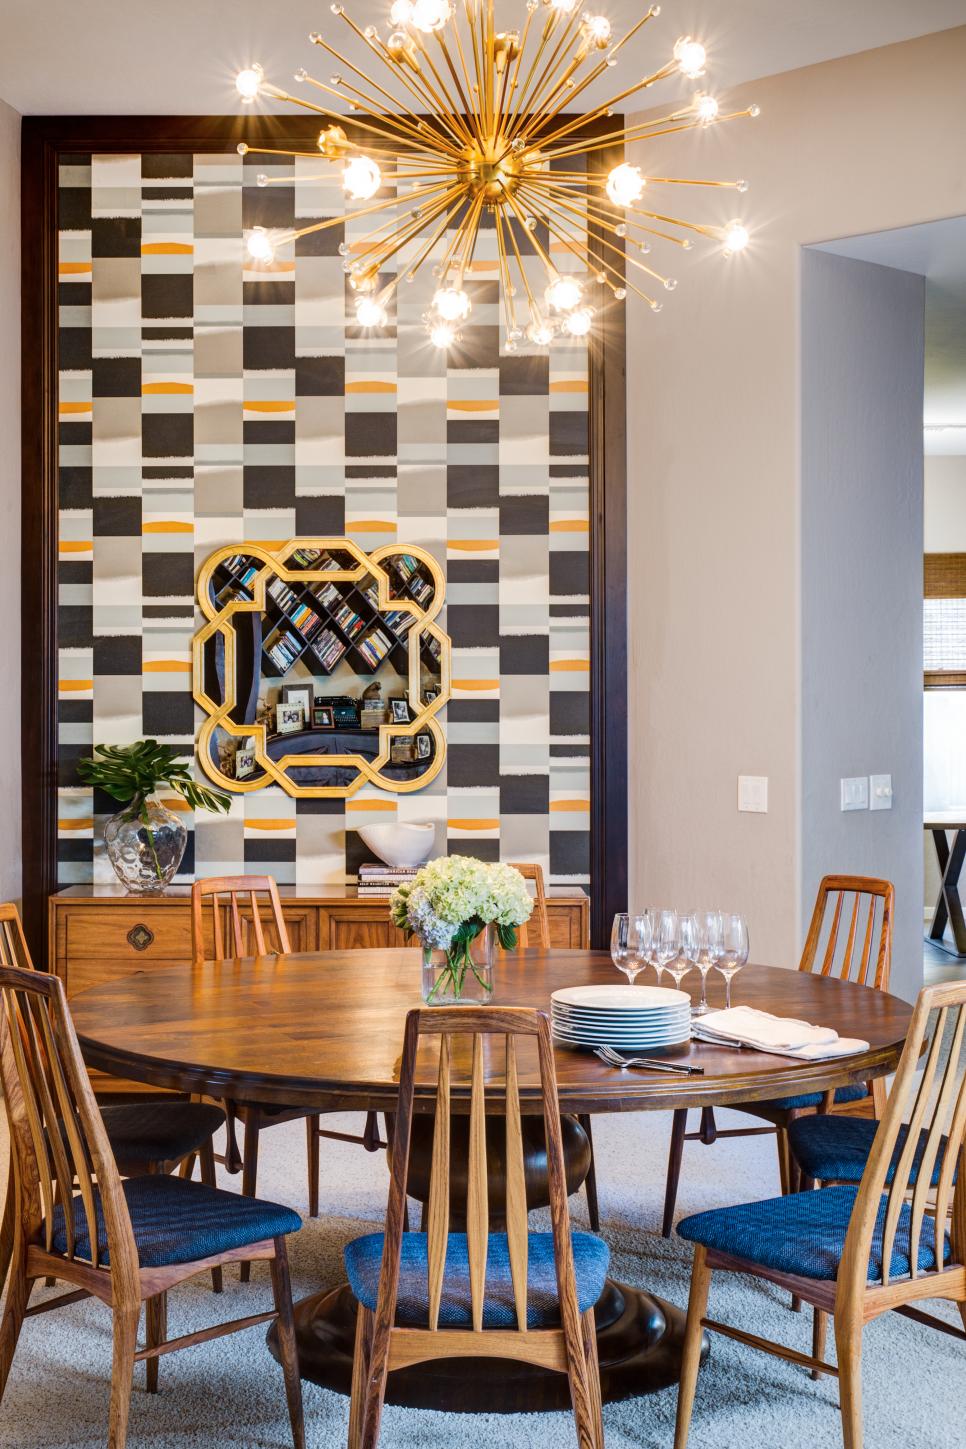 Midcentury Dining Room With Pedestal Table | HGTV